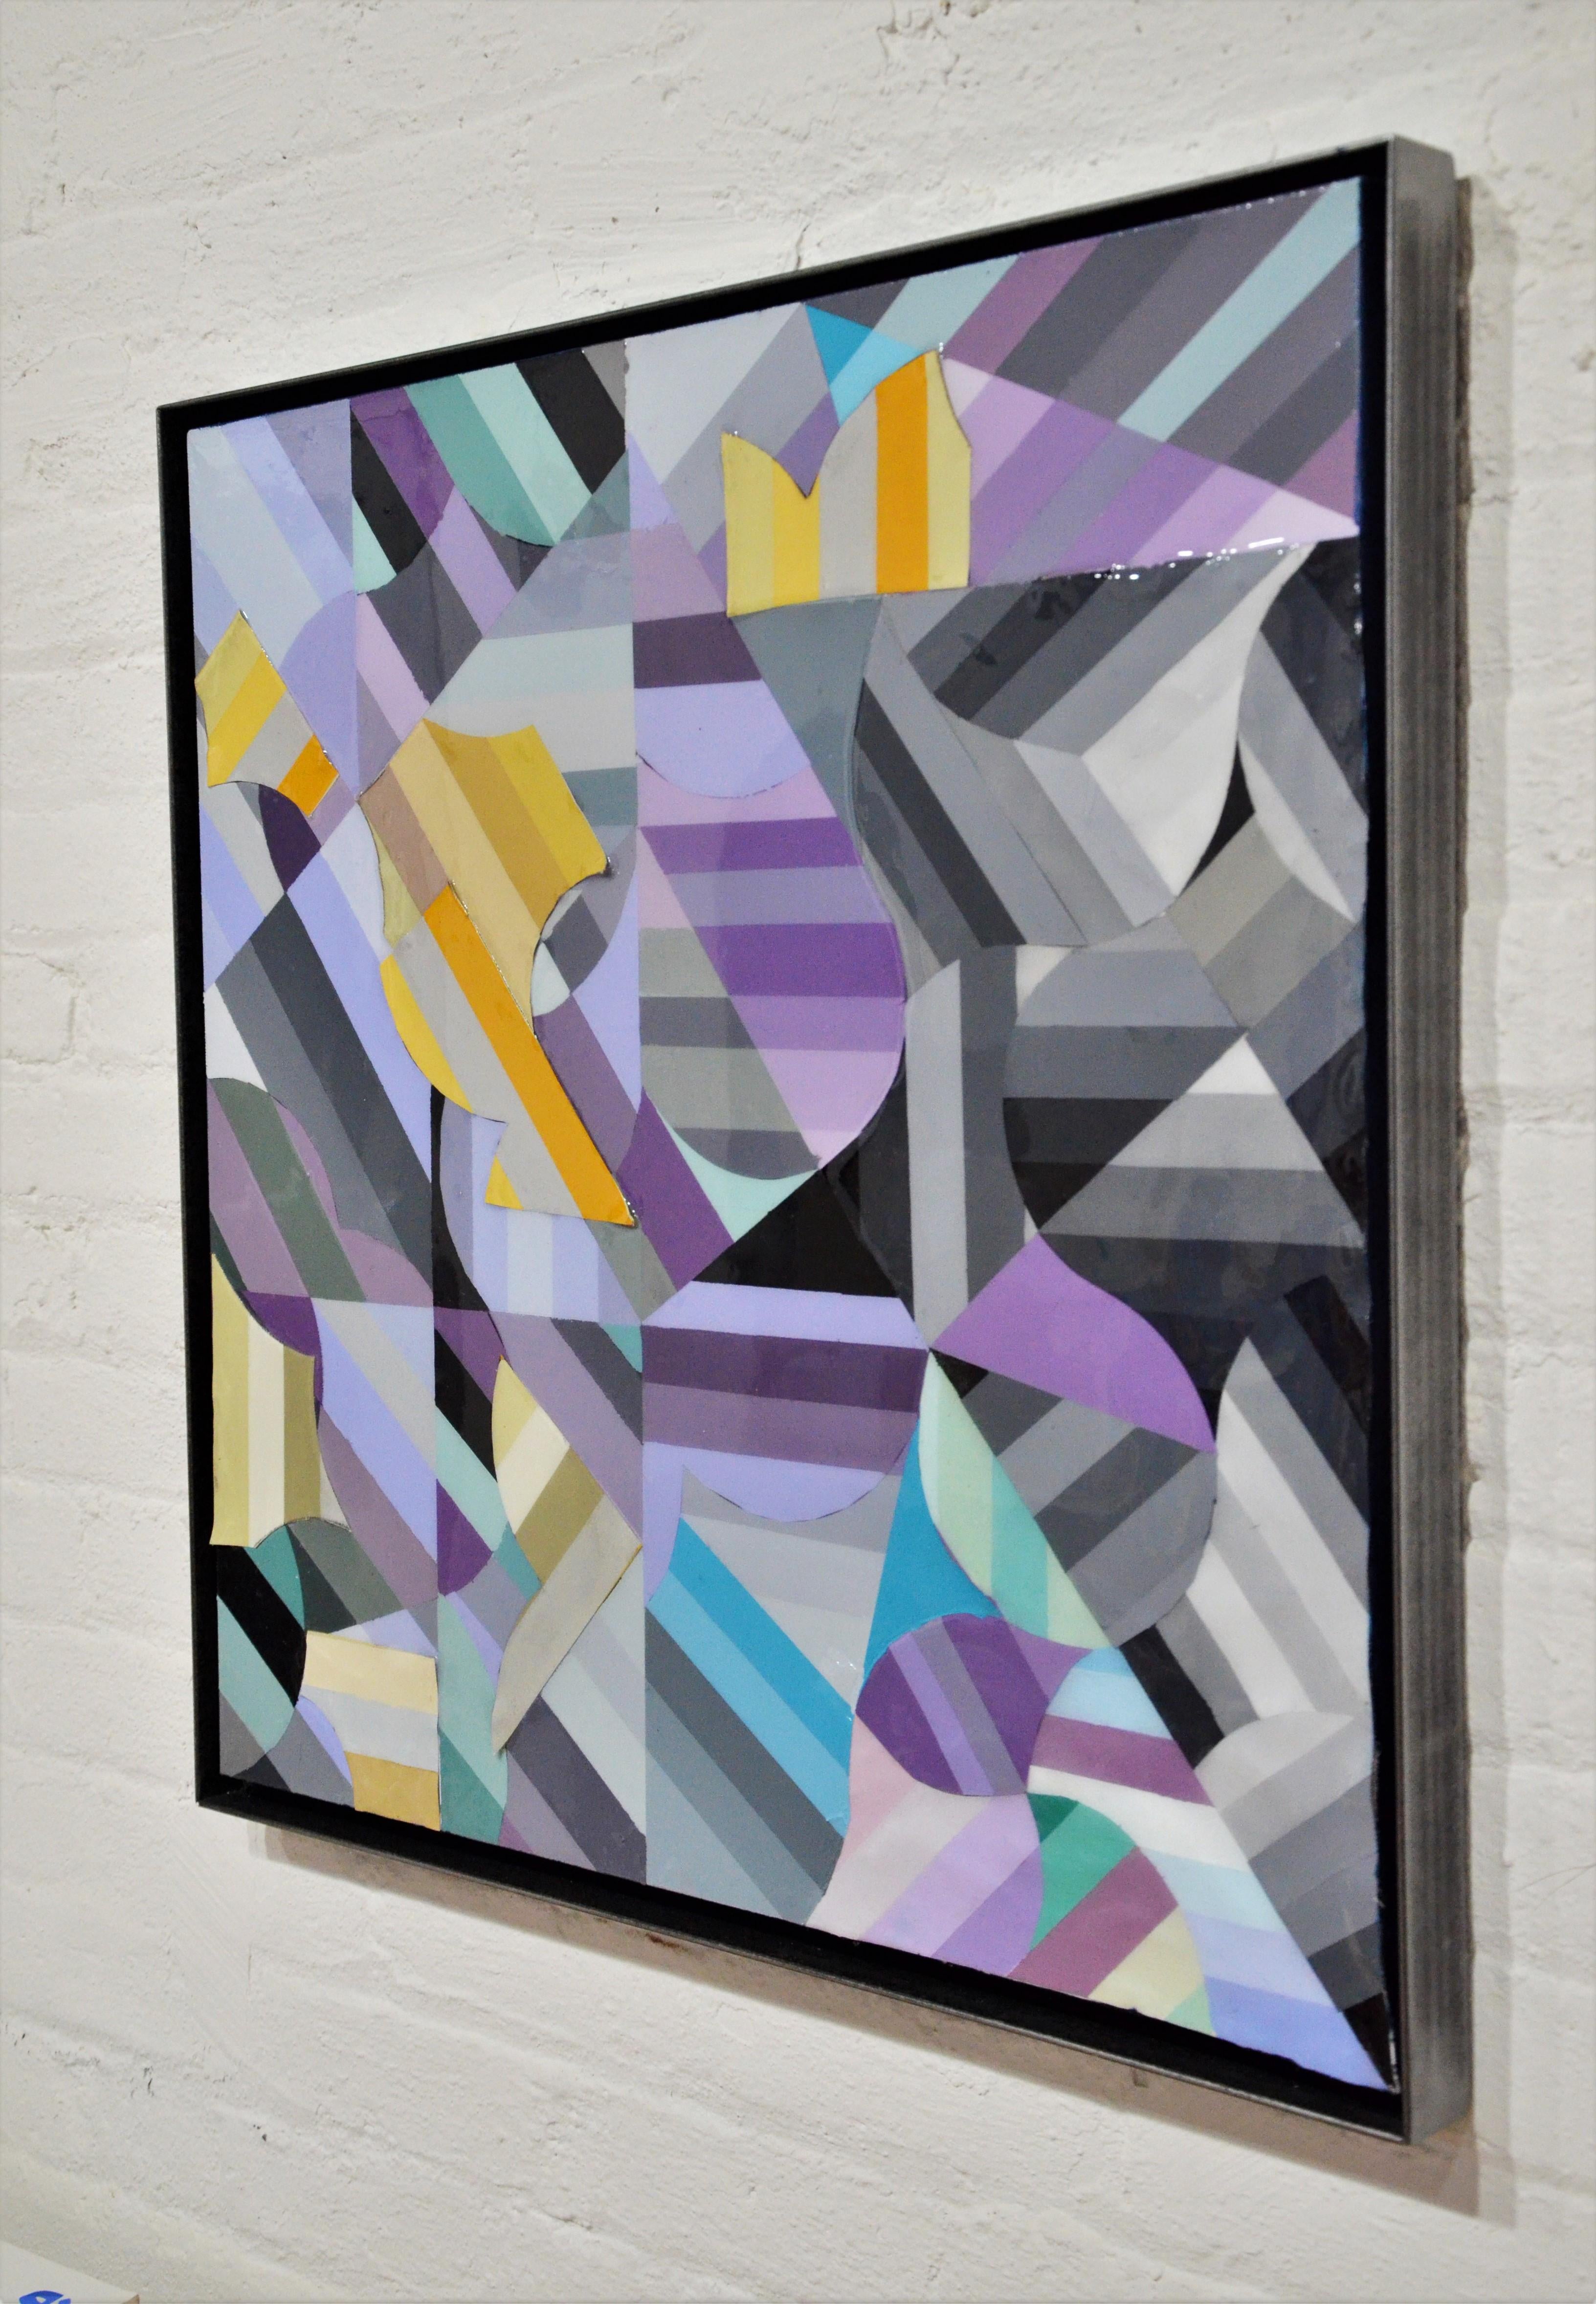 “Libra Full Moon”
25 inches x 35 inches
Acrylic and Latex pieces in a resin pour on canvas
Silver Gunmetal Floating Frame

Geometric abstract painting contrasting shades of gray with vivid tones of blue, violet, and yellow; created by artist Edward